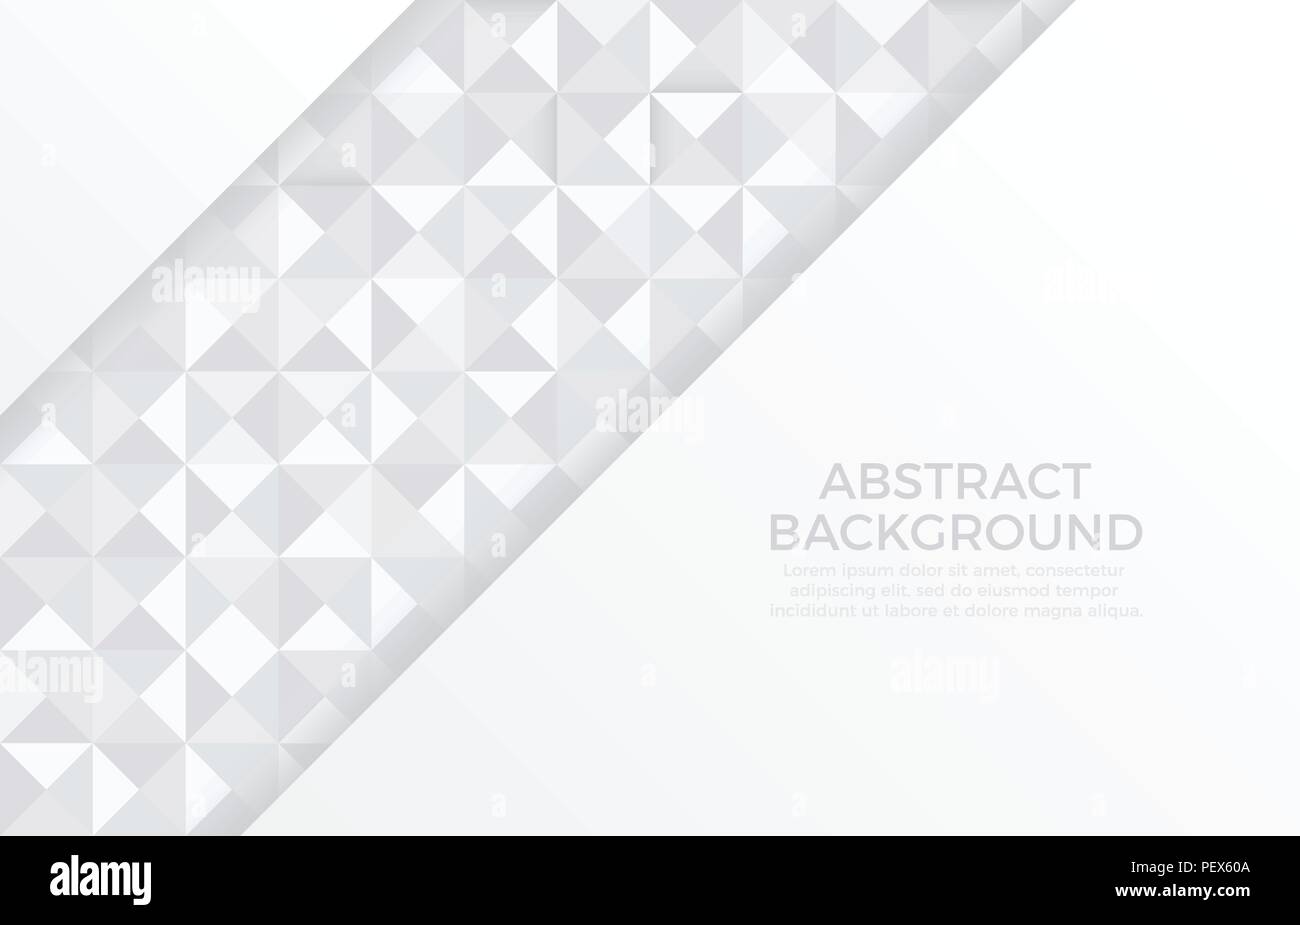 Gray color and white color background abstract art Stock Vector